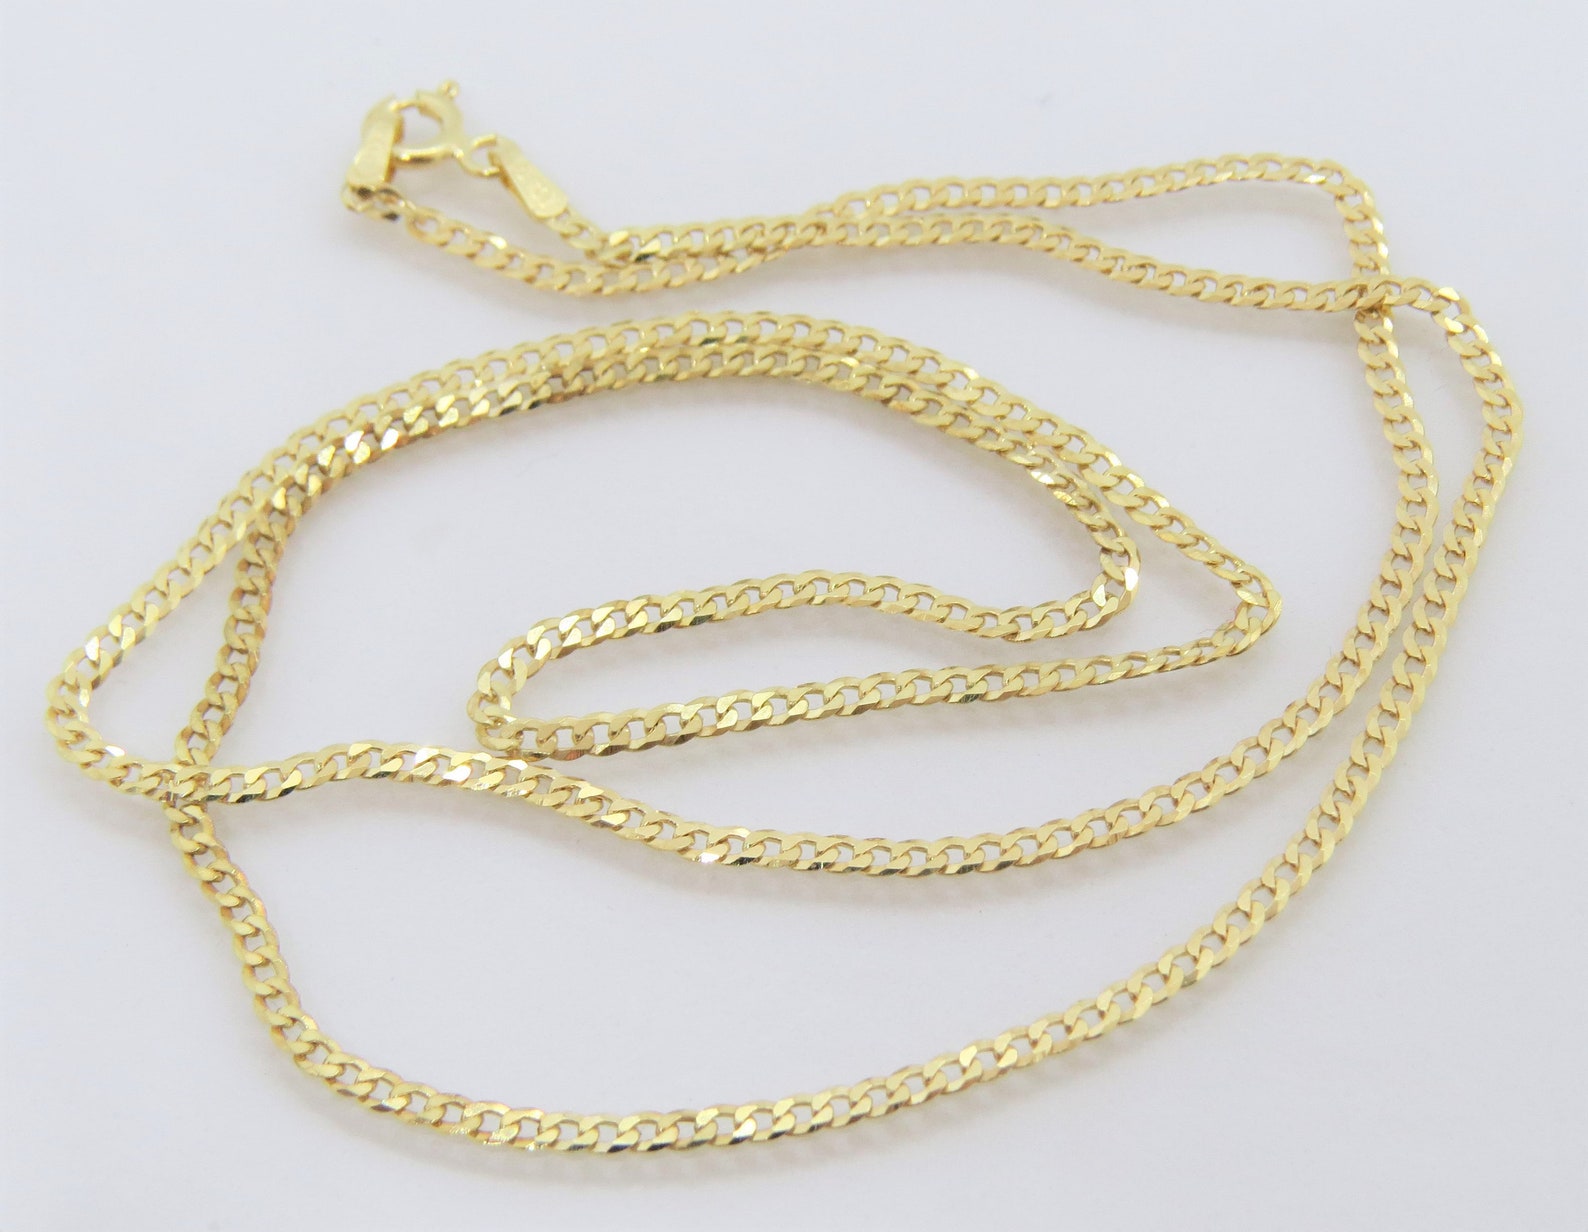 Vintage 14K Solid Yellow Gold Cuban Link Chain Necklace - Etsy